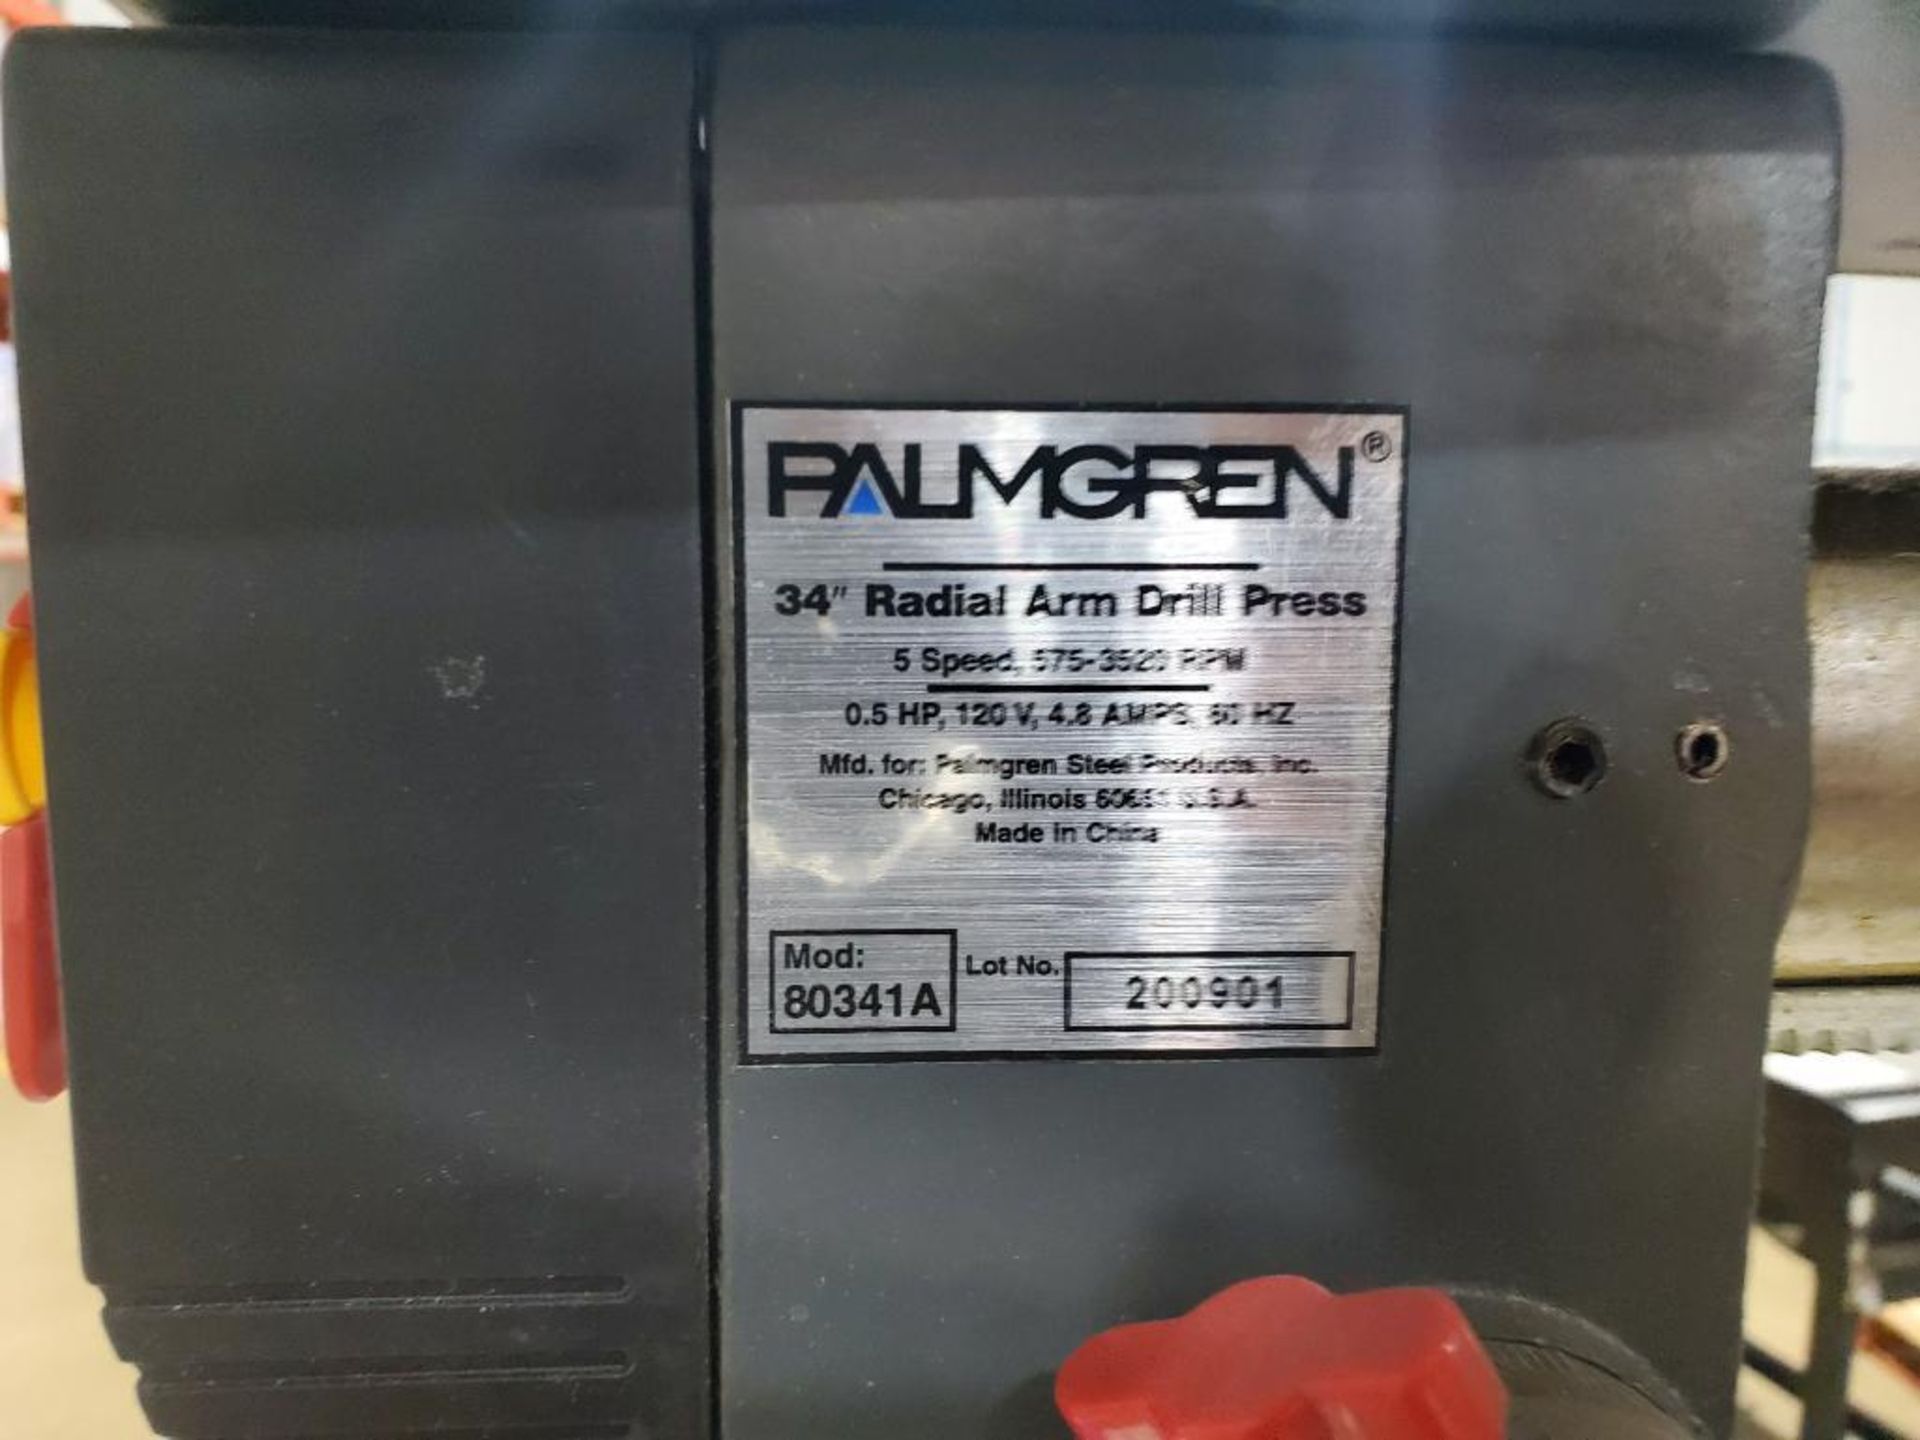 Palgren 34in radial arm drill press. 5 speed. Model 80341A. - Image 3 of 12